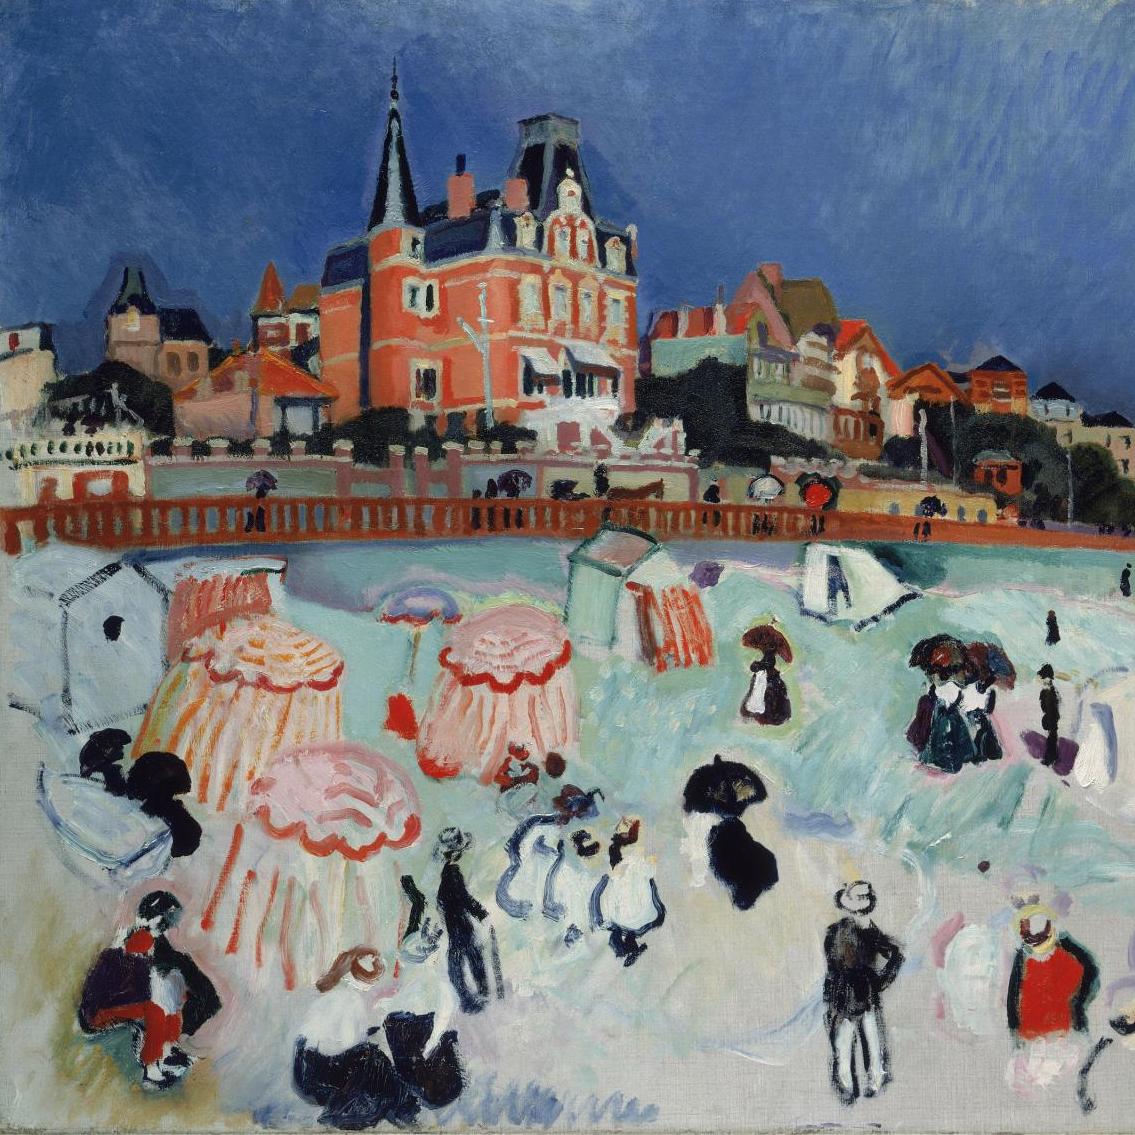 Expositions - Raoul Dufy au Havre